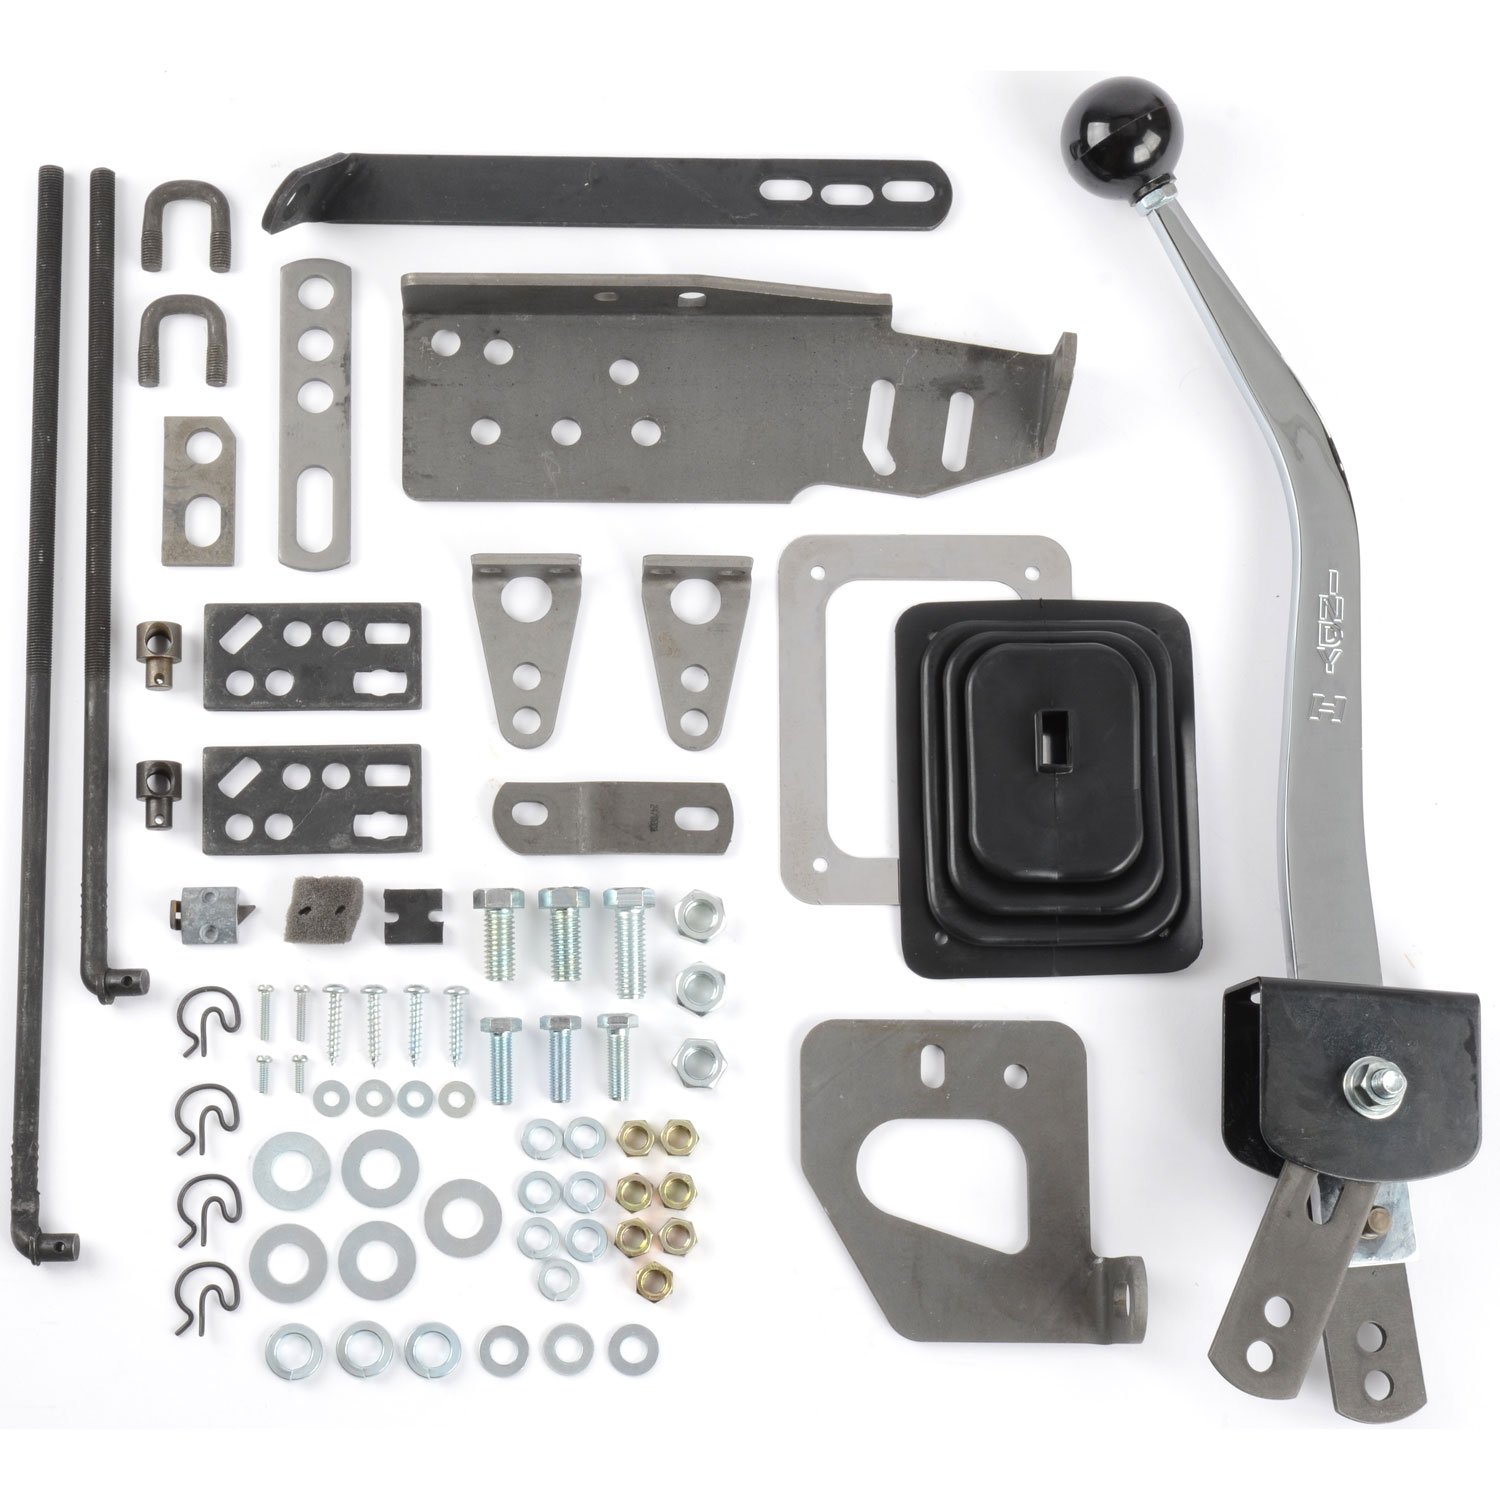 5010002 Indy 3-Speed Shifter Kit